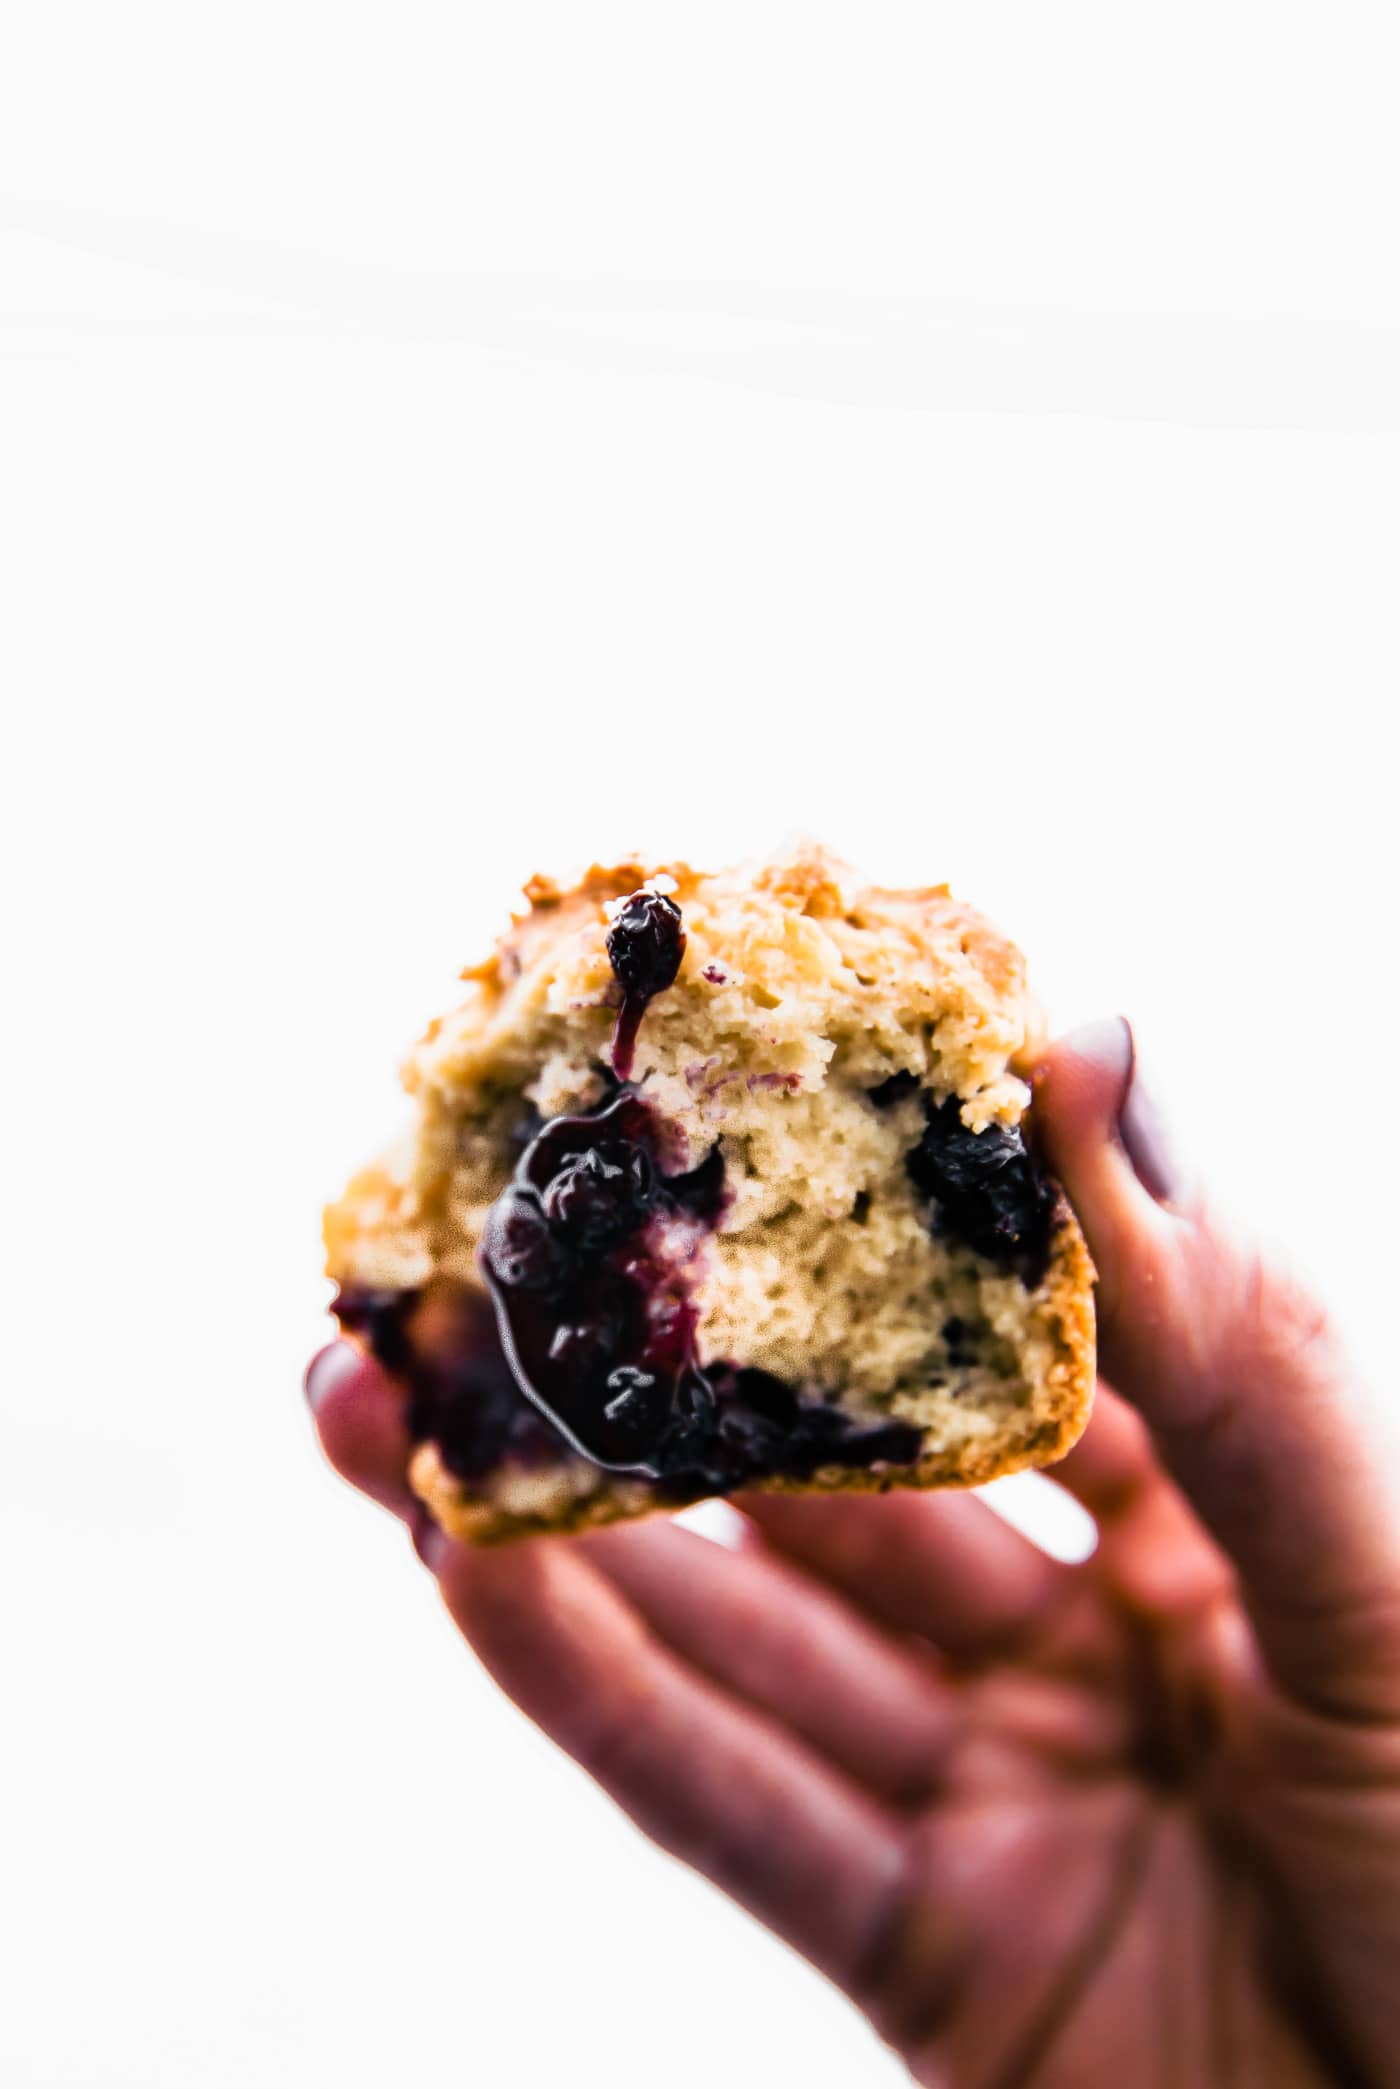 A gluten free blueberry muffin with bite taken from side being held against white background.